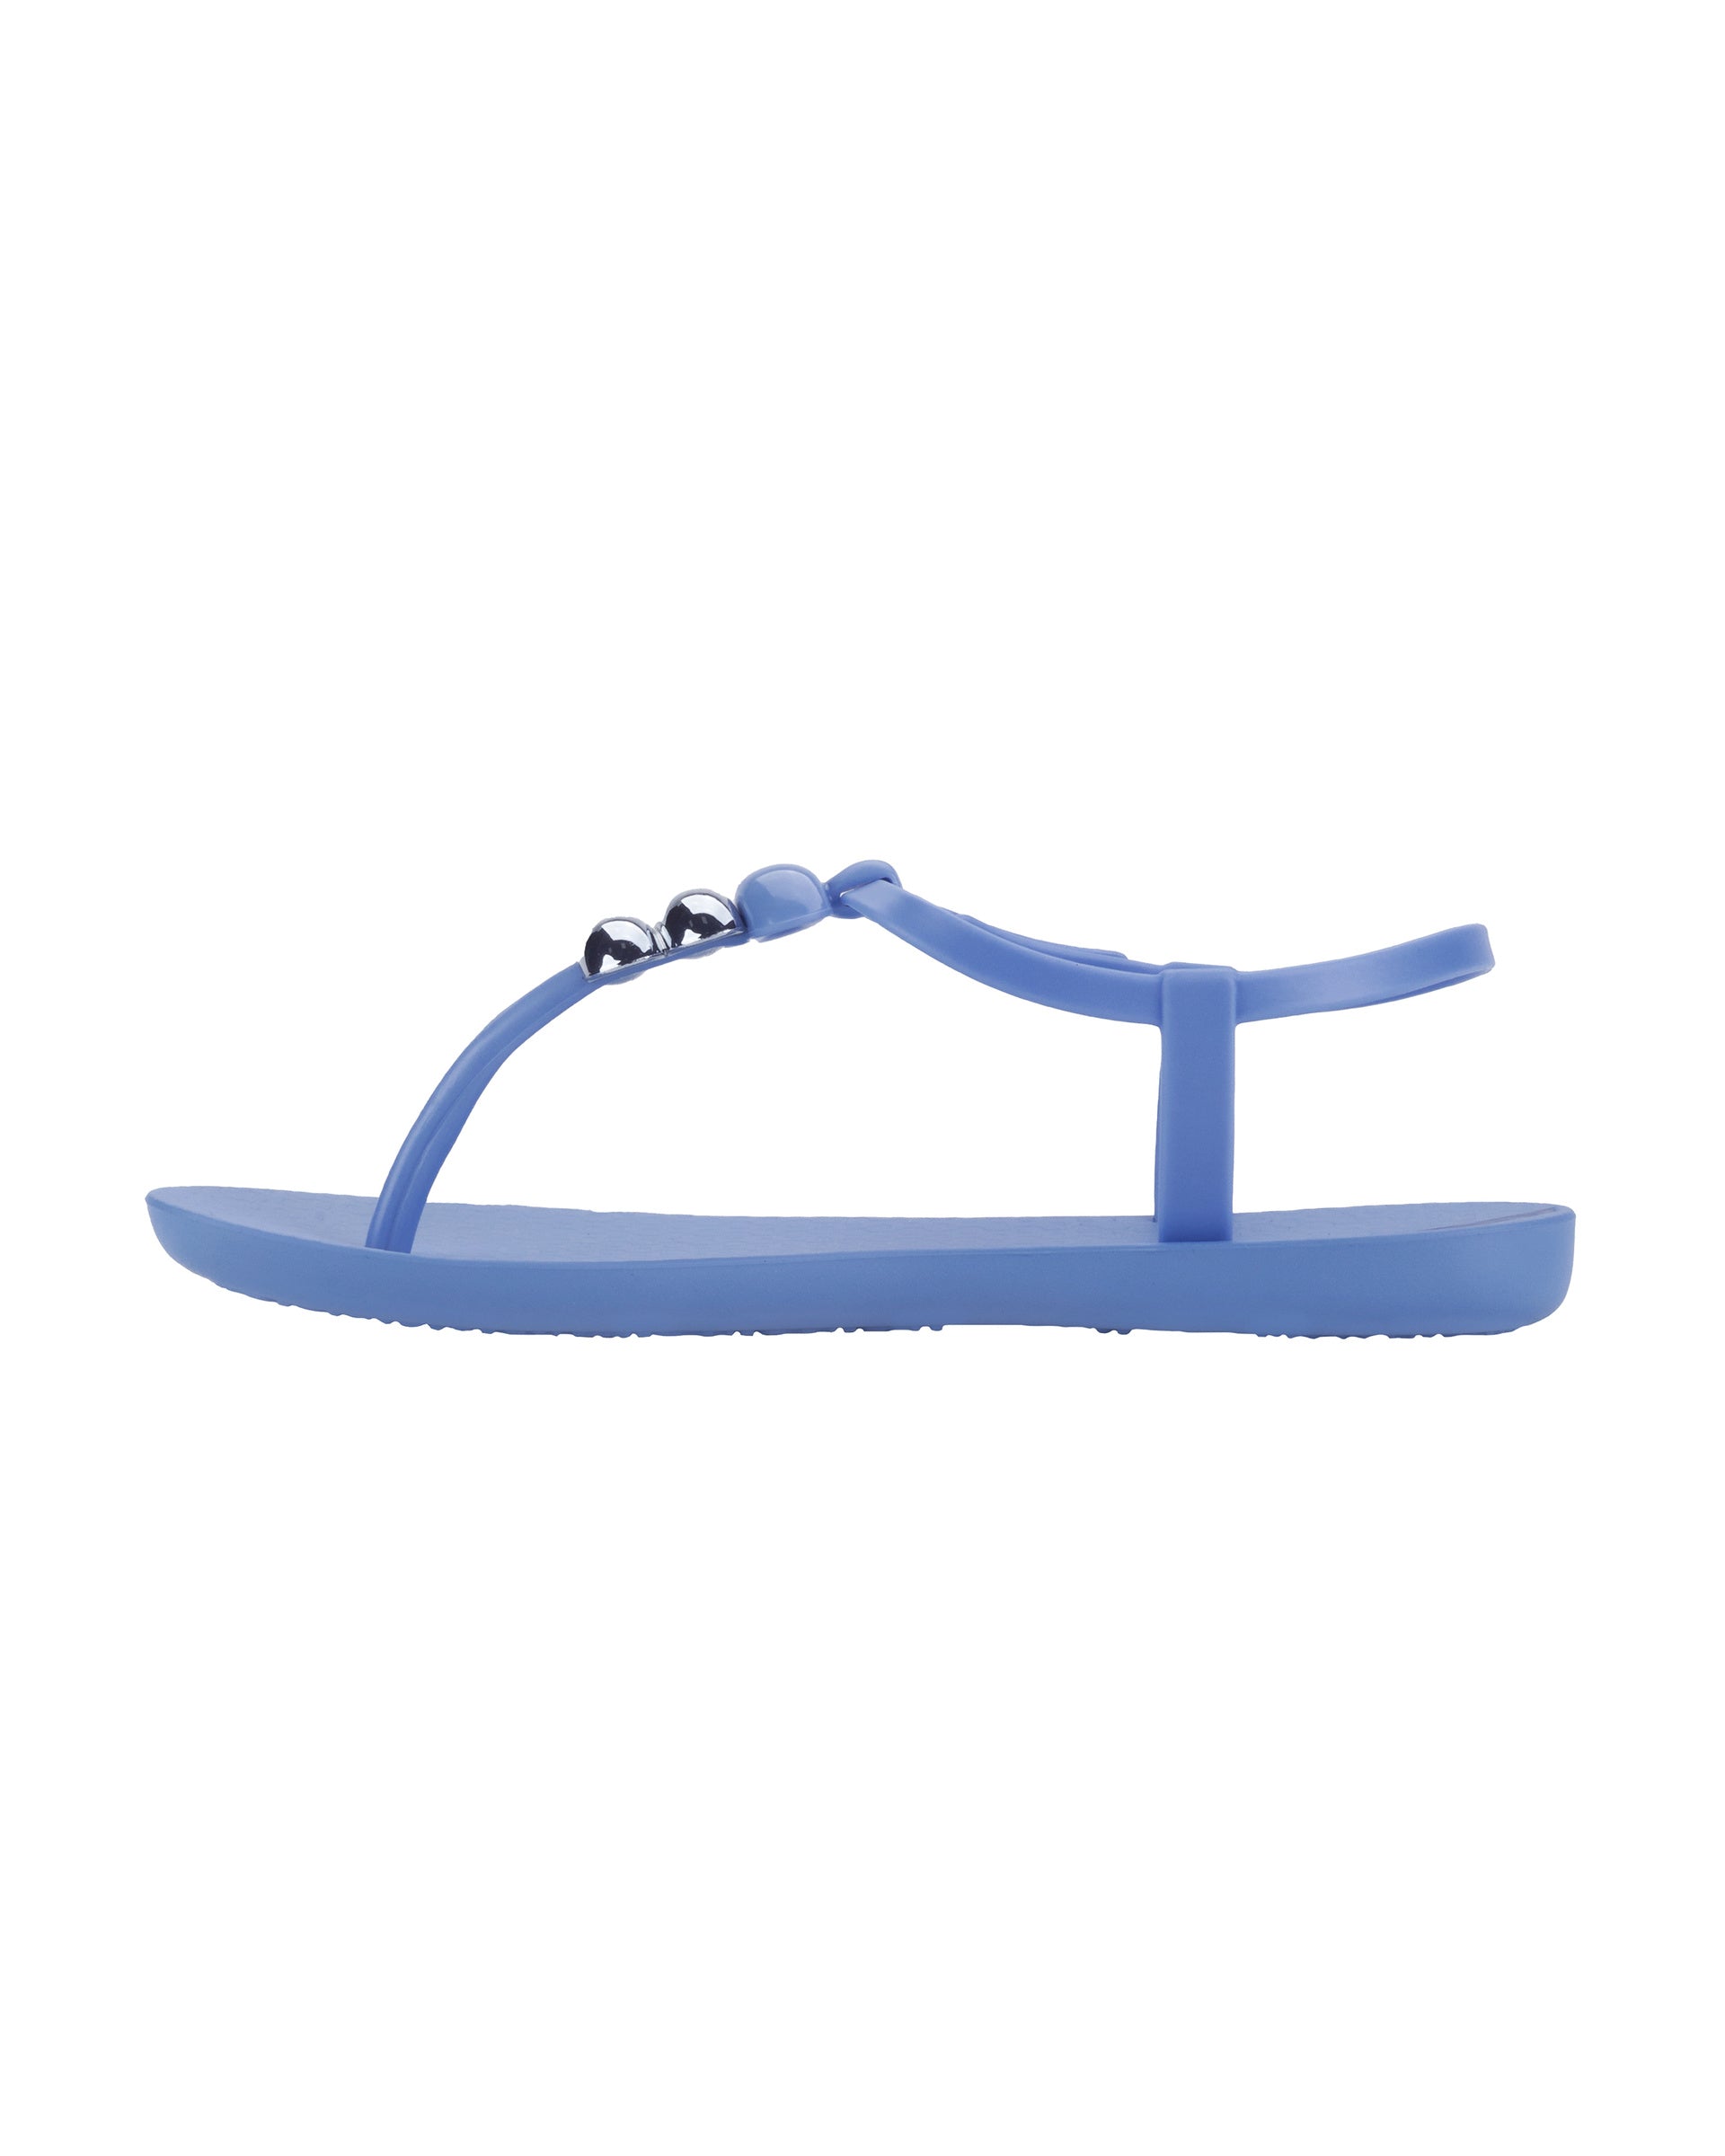 Inner side view of a blue Ipanema Class women's sandal with 3 bubble baubles on the t-strap.